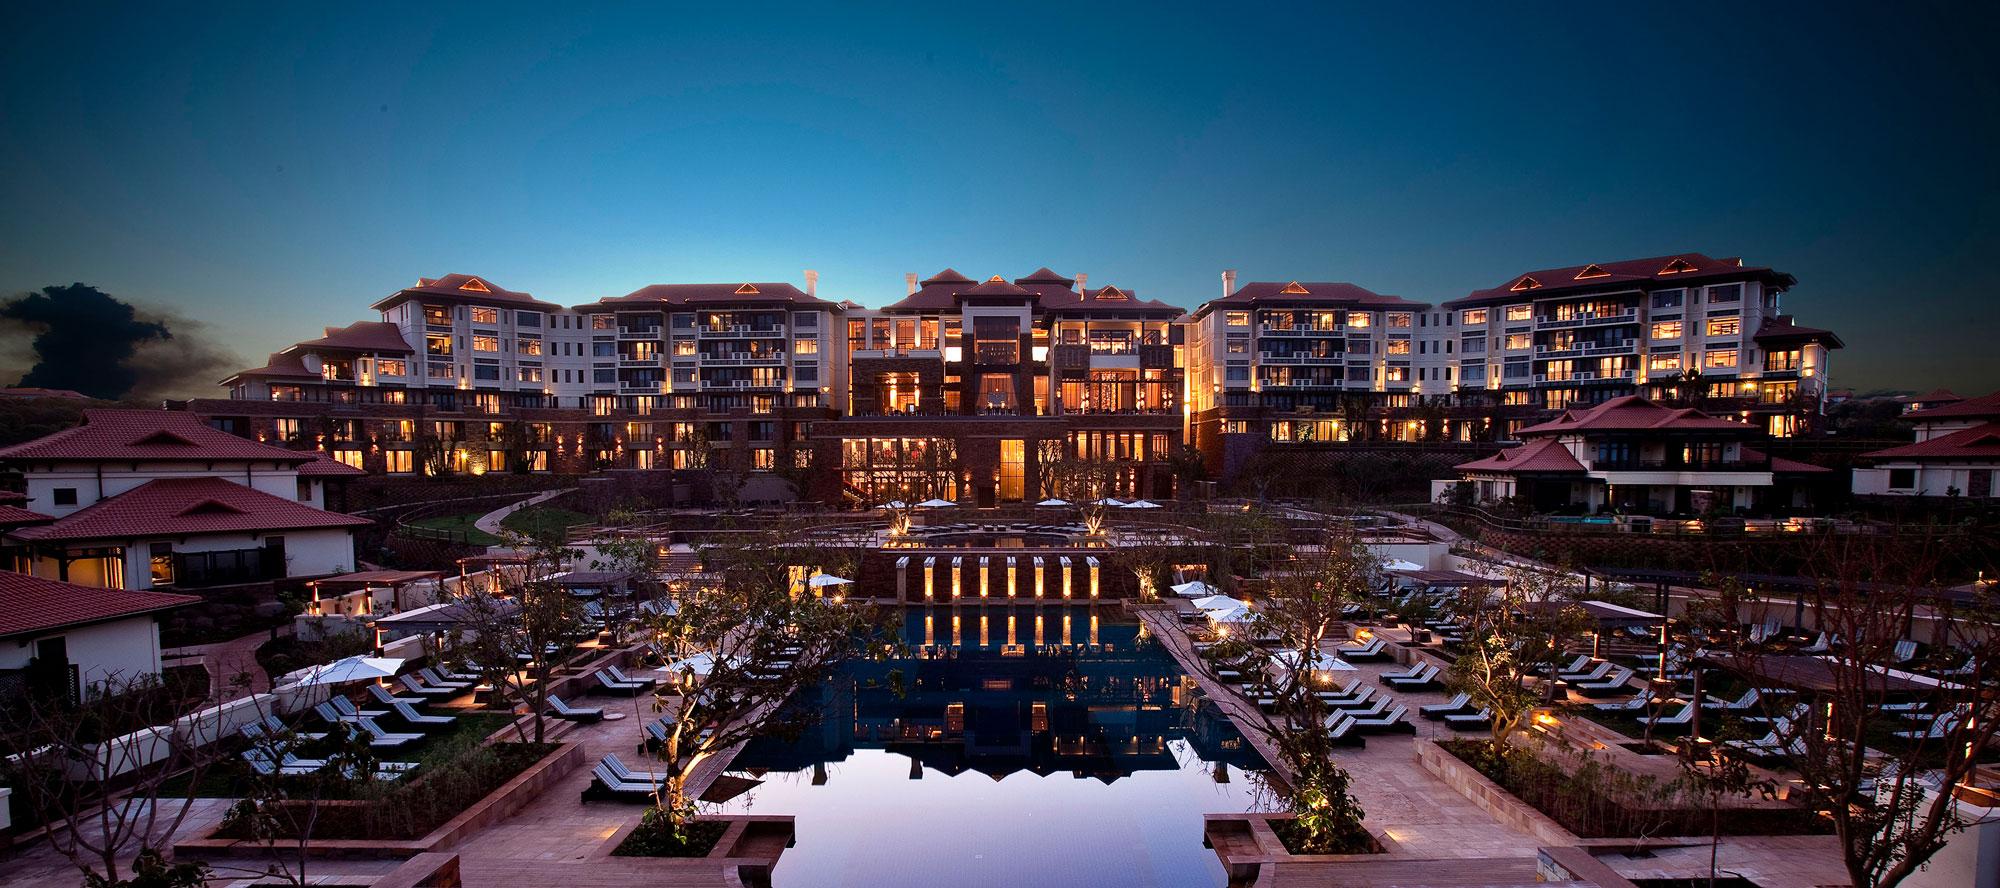 The Fairmont Zimbali Resort's picturesque hotel situated in sensational South Africa.